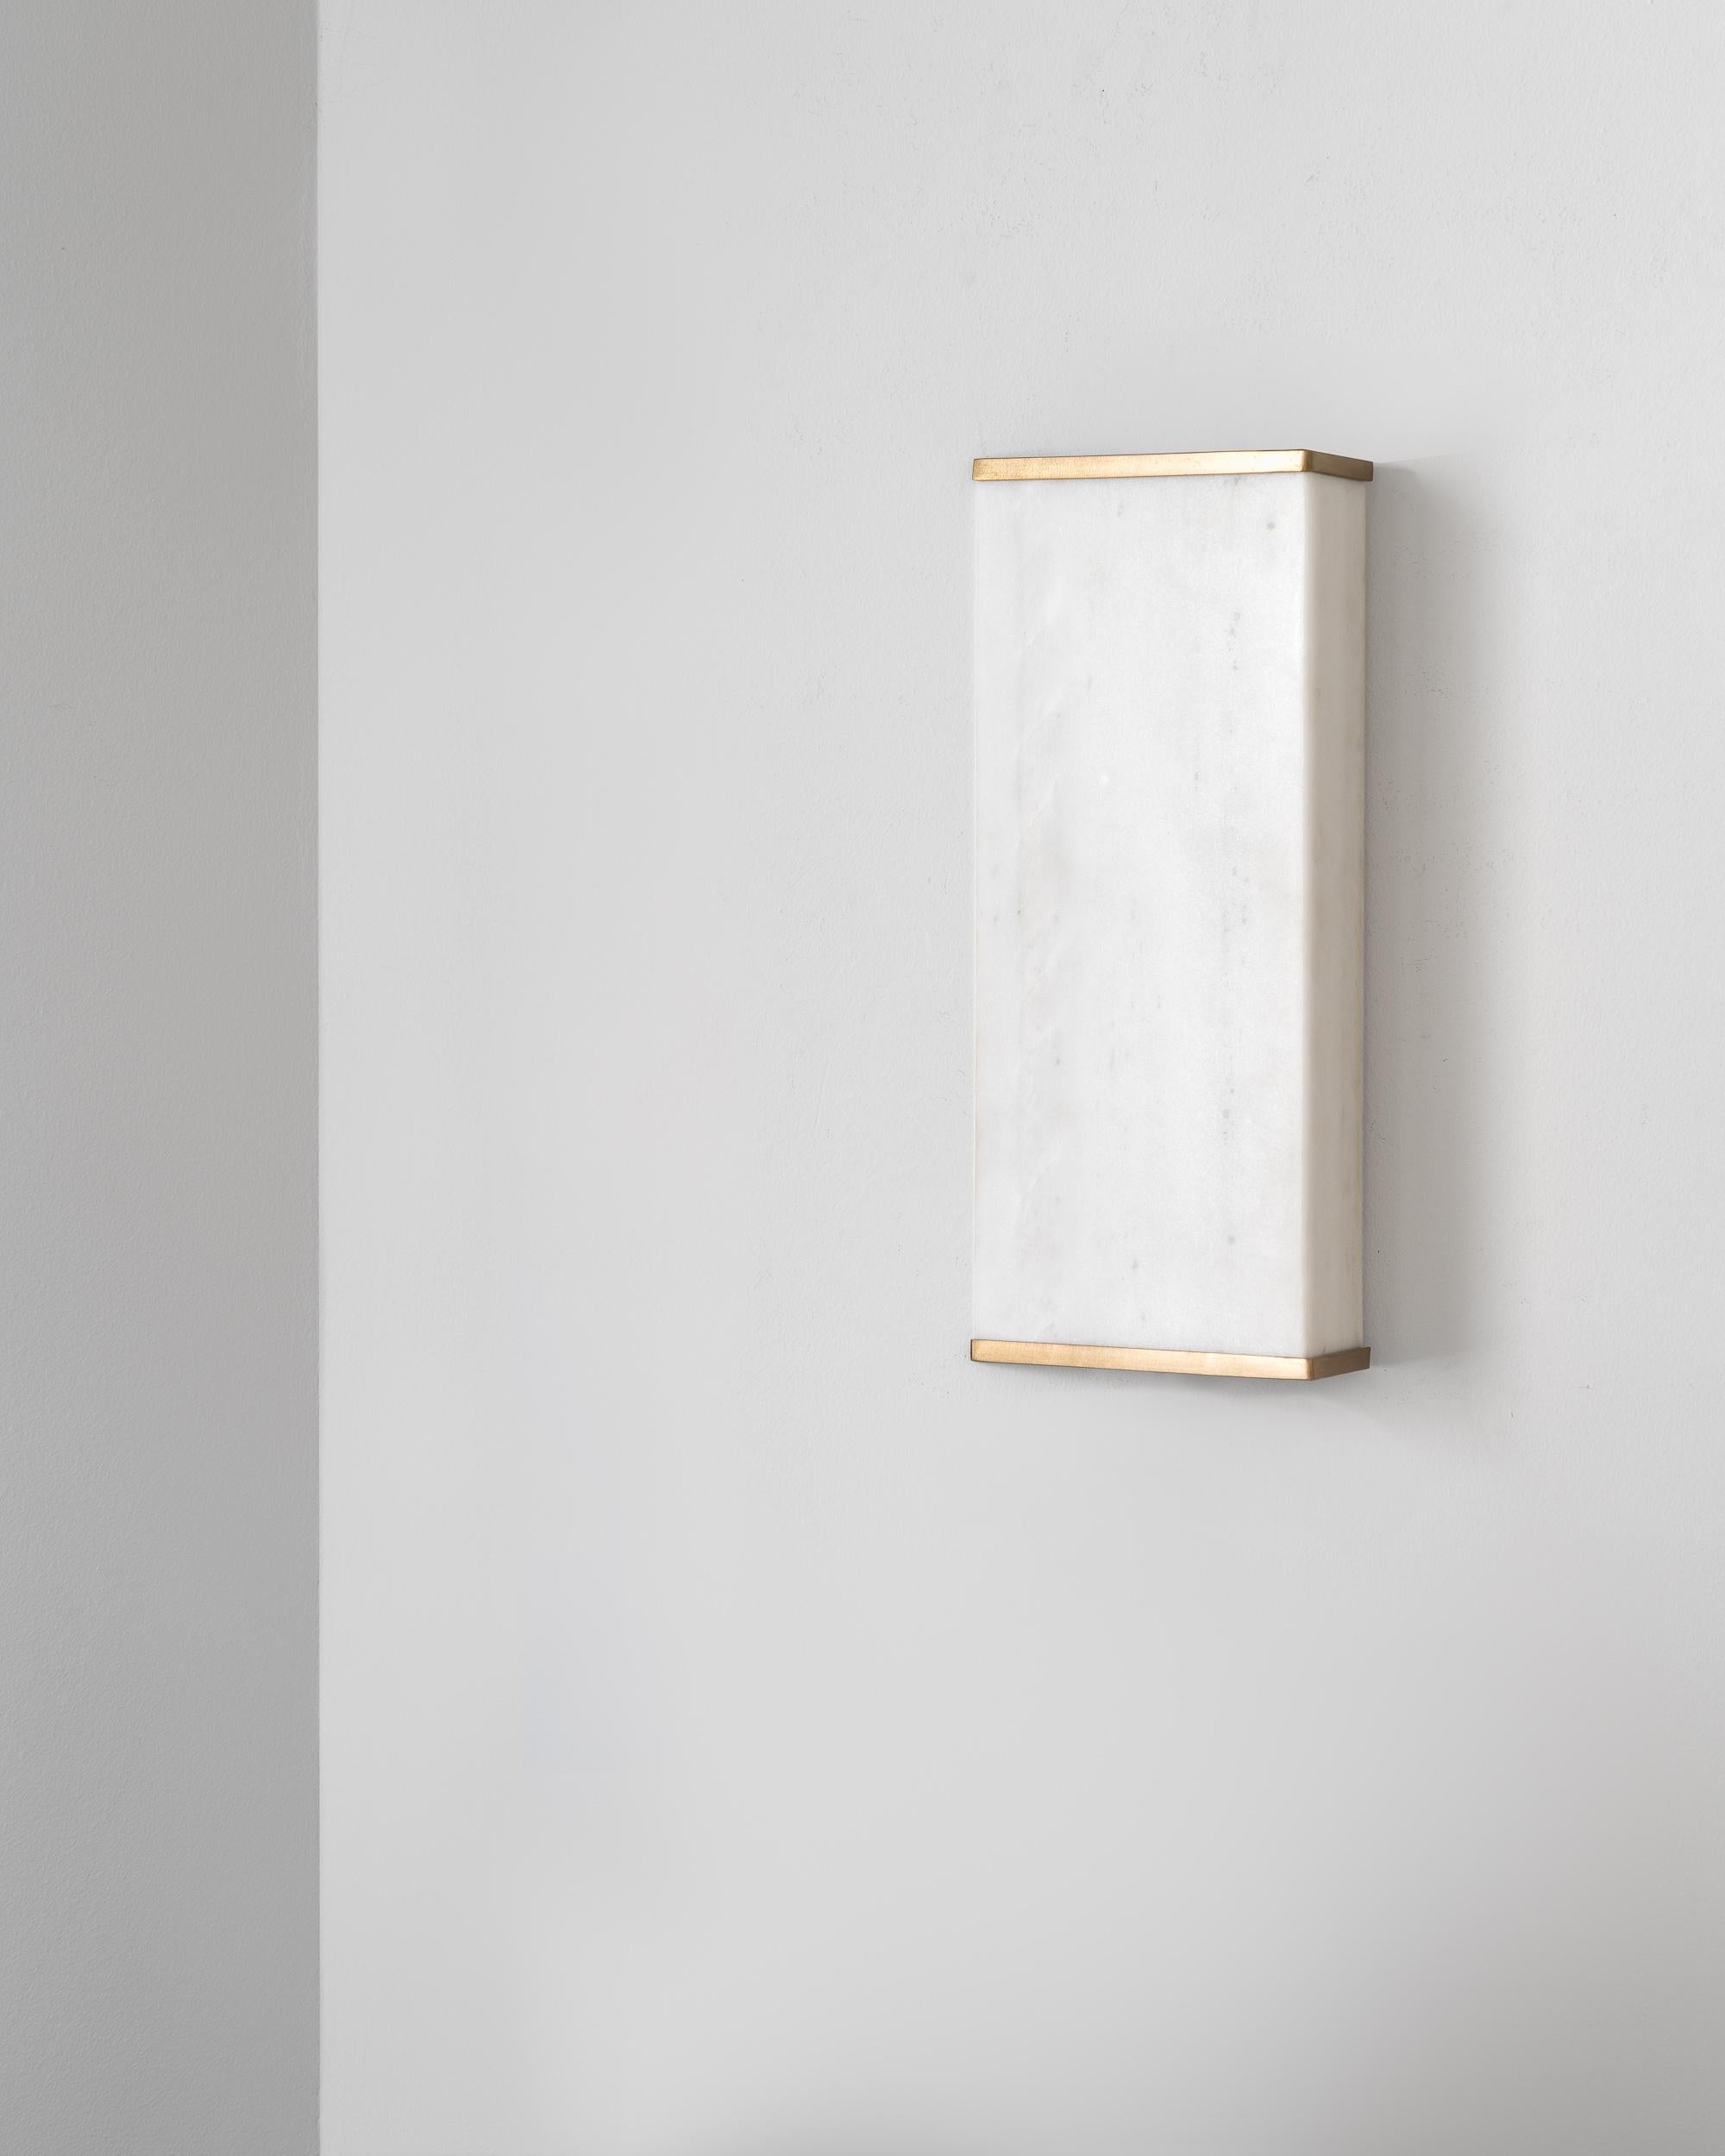 Appleak wall light highlights the translucency of marble and its unique crystalline quality. 

It consists of a seamless volume and a bronze frame. With a triangular, off-centred geometry, it features an elegant but also sophisticated